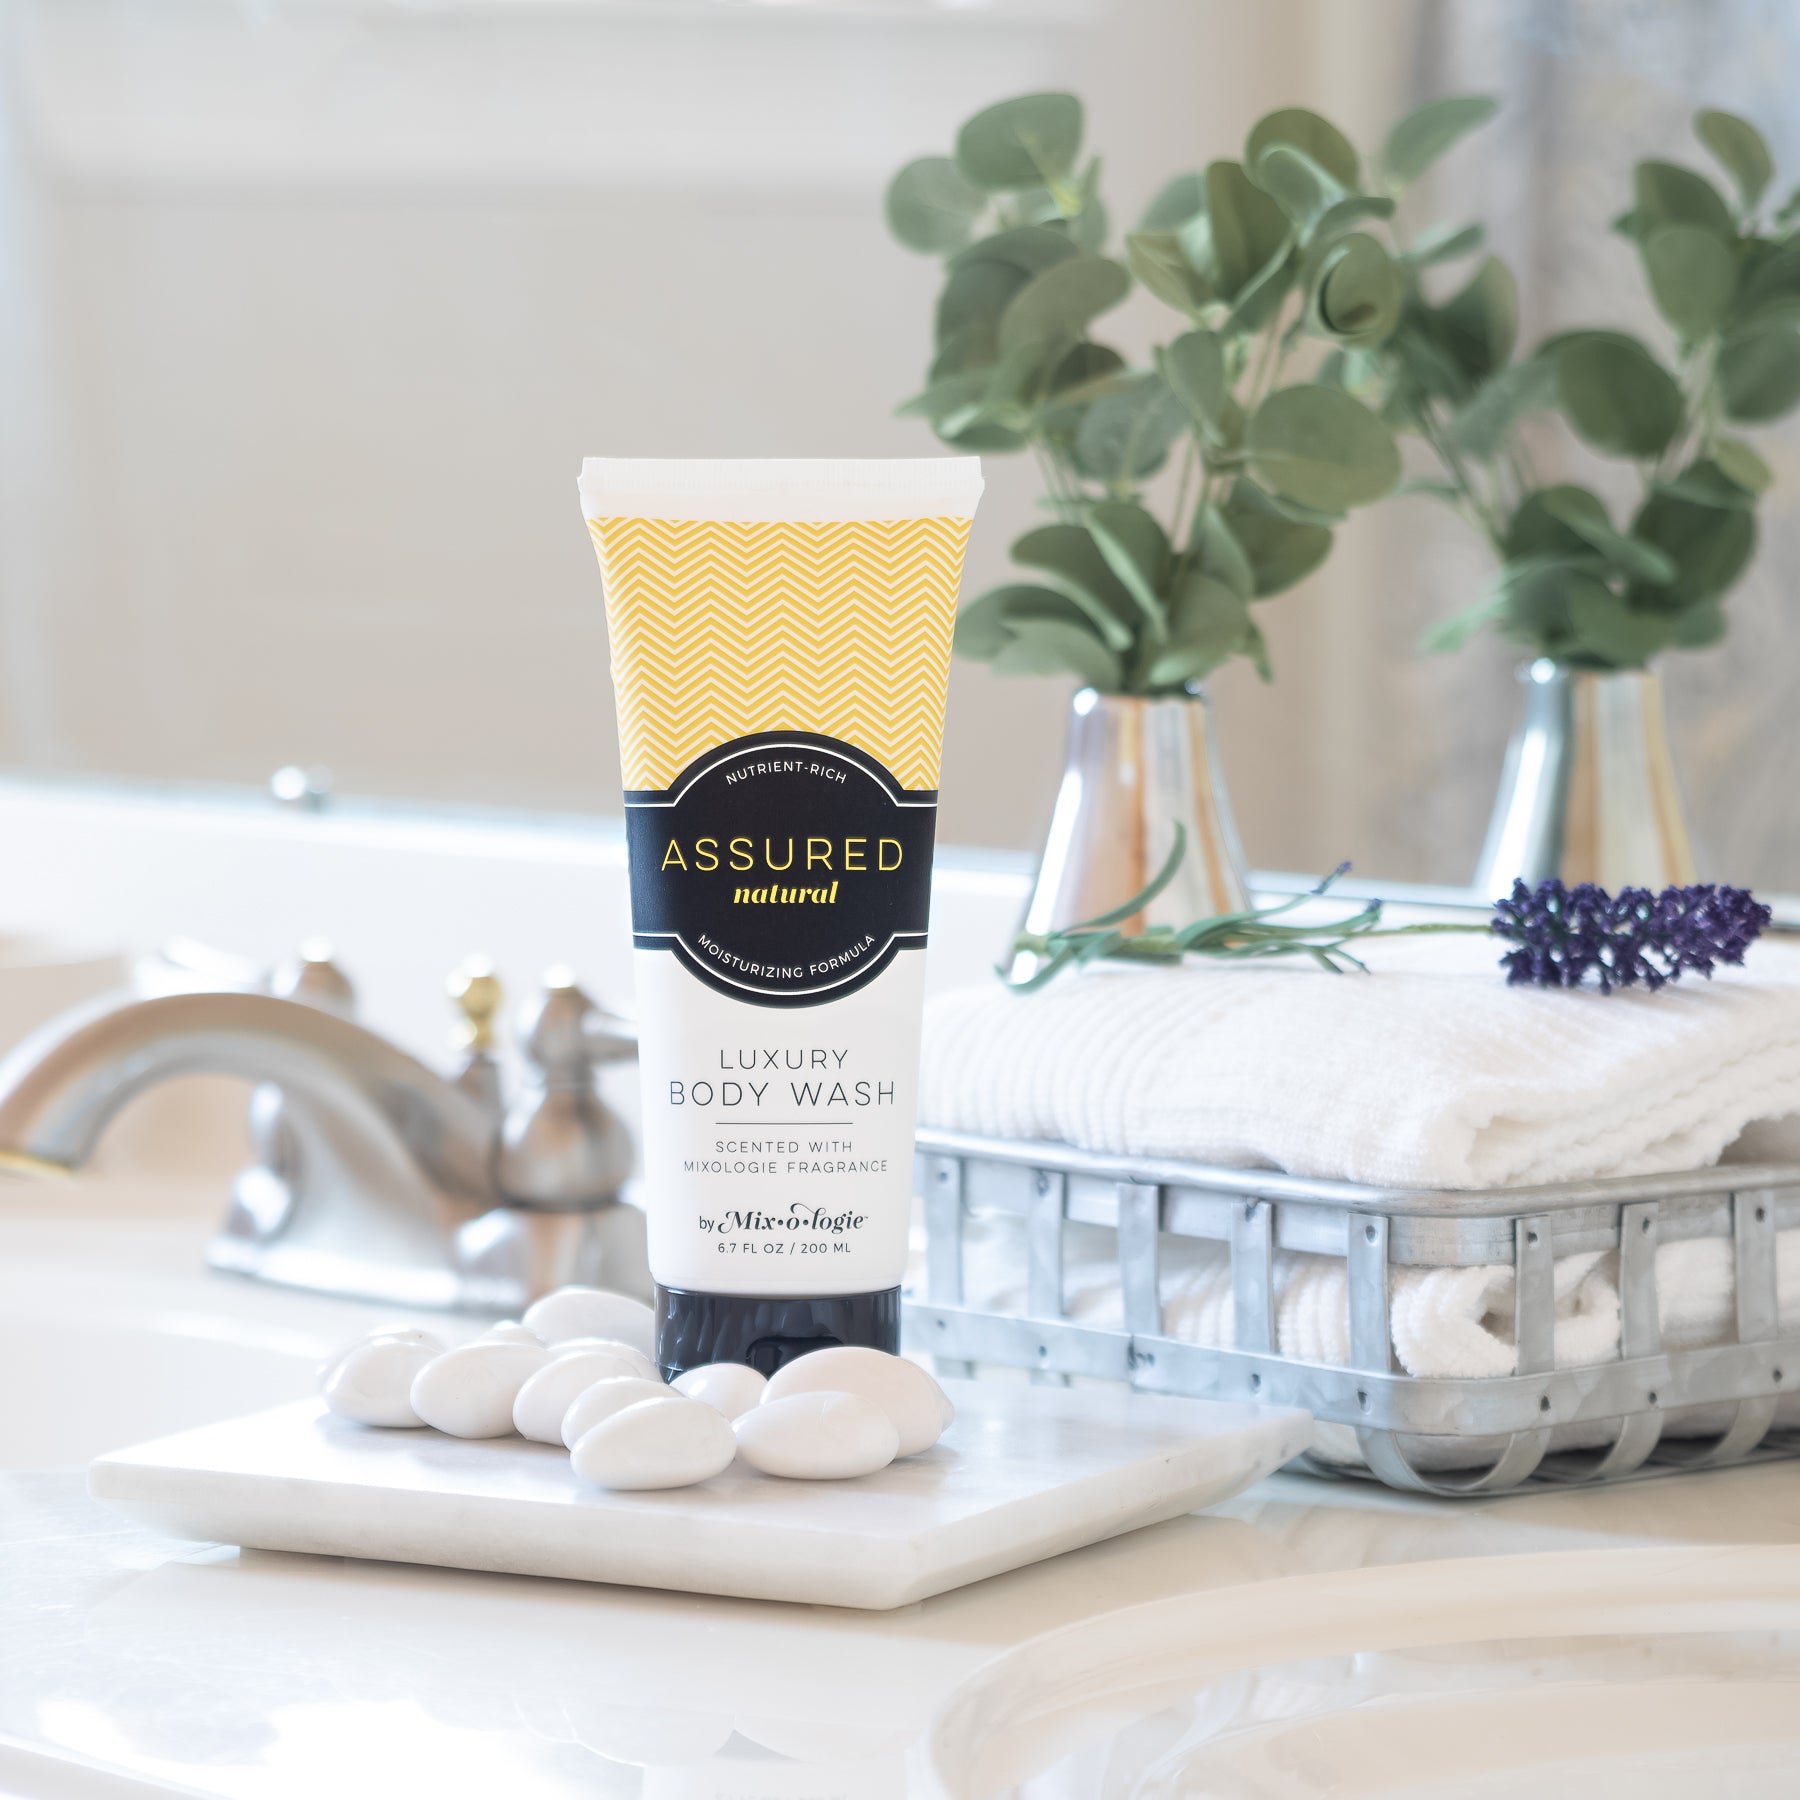 Luxury Body Wash in Mixologie’s Assured (Natural) in yellow color sample package with black label. Contains 6.7 fl oz or 200 mL pictured on a bathroom counter with towels, greenery, and white pebbles.